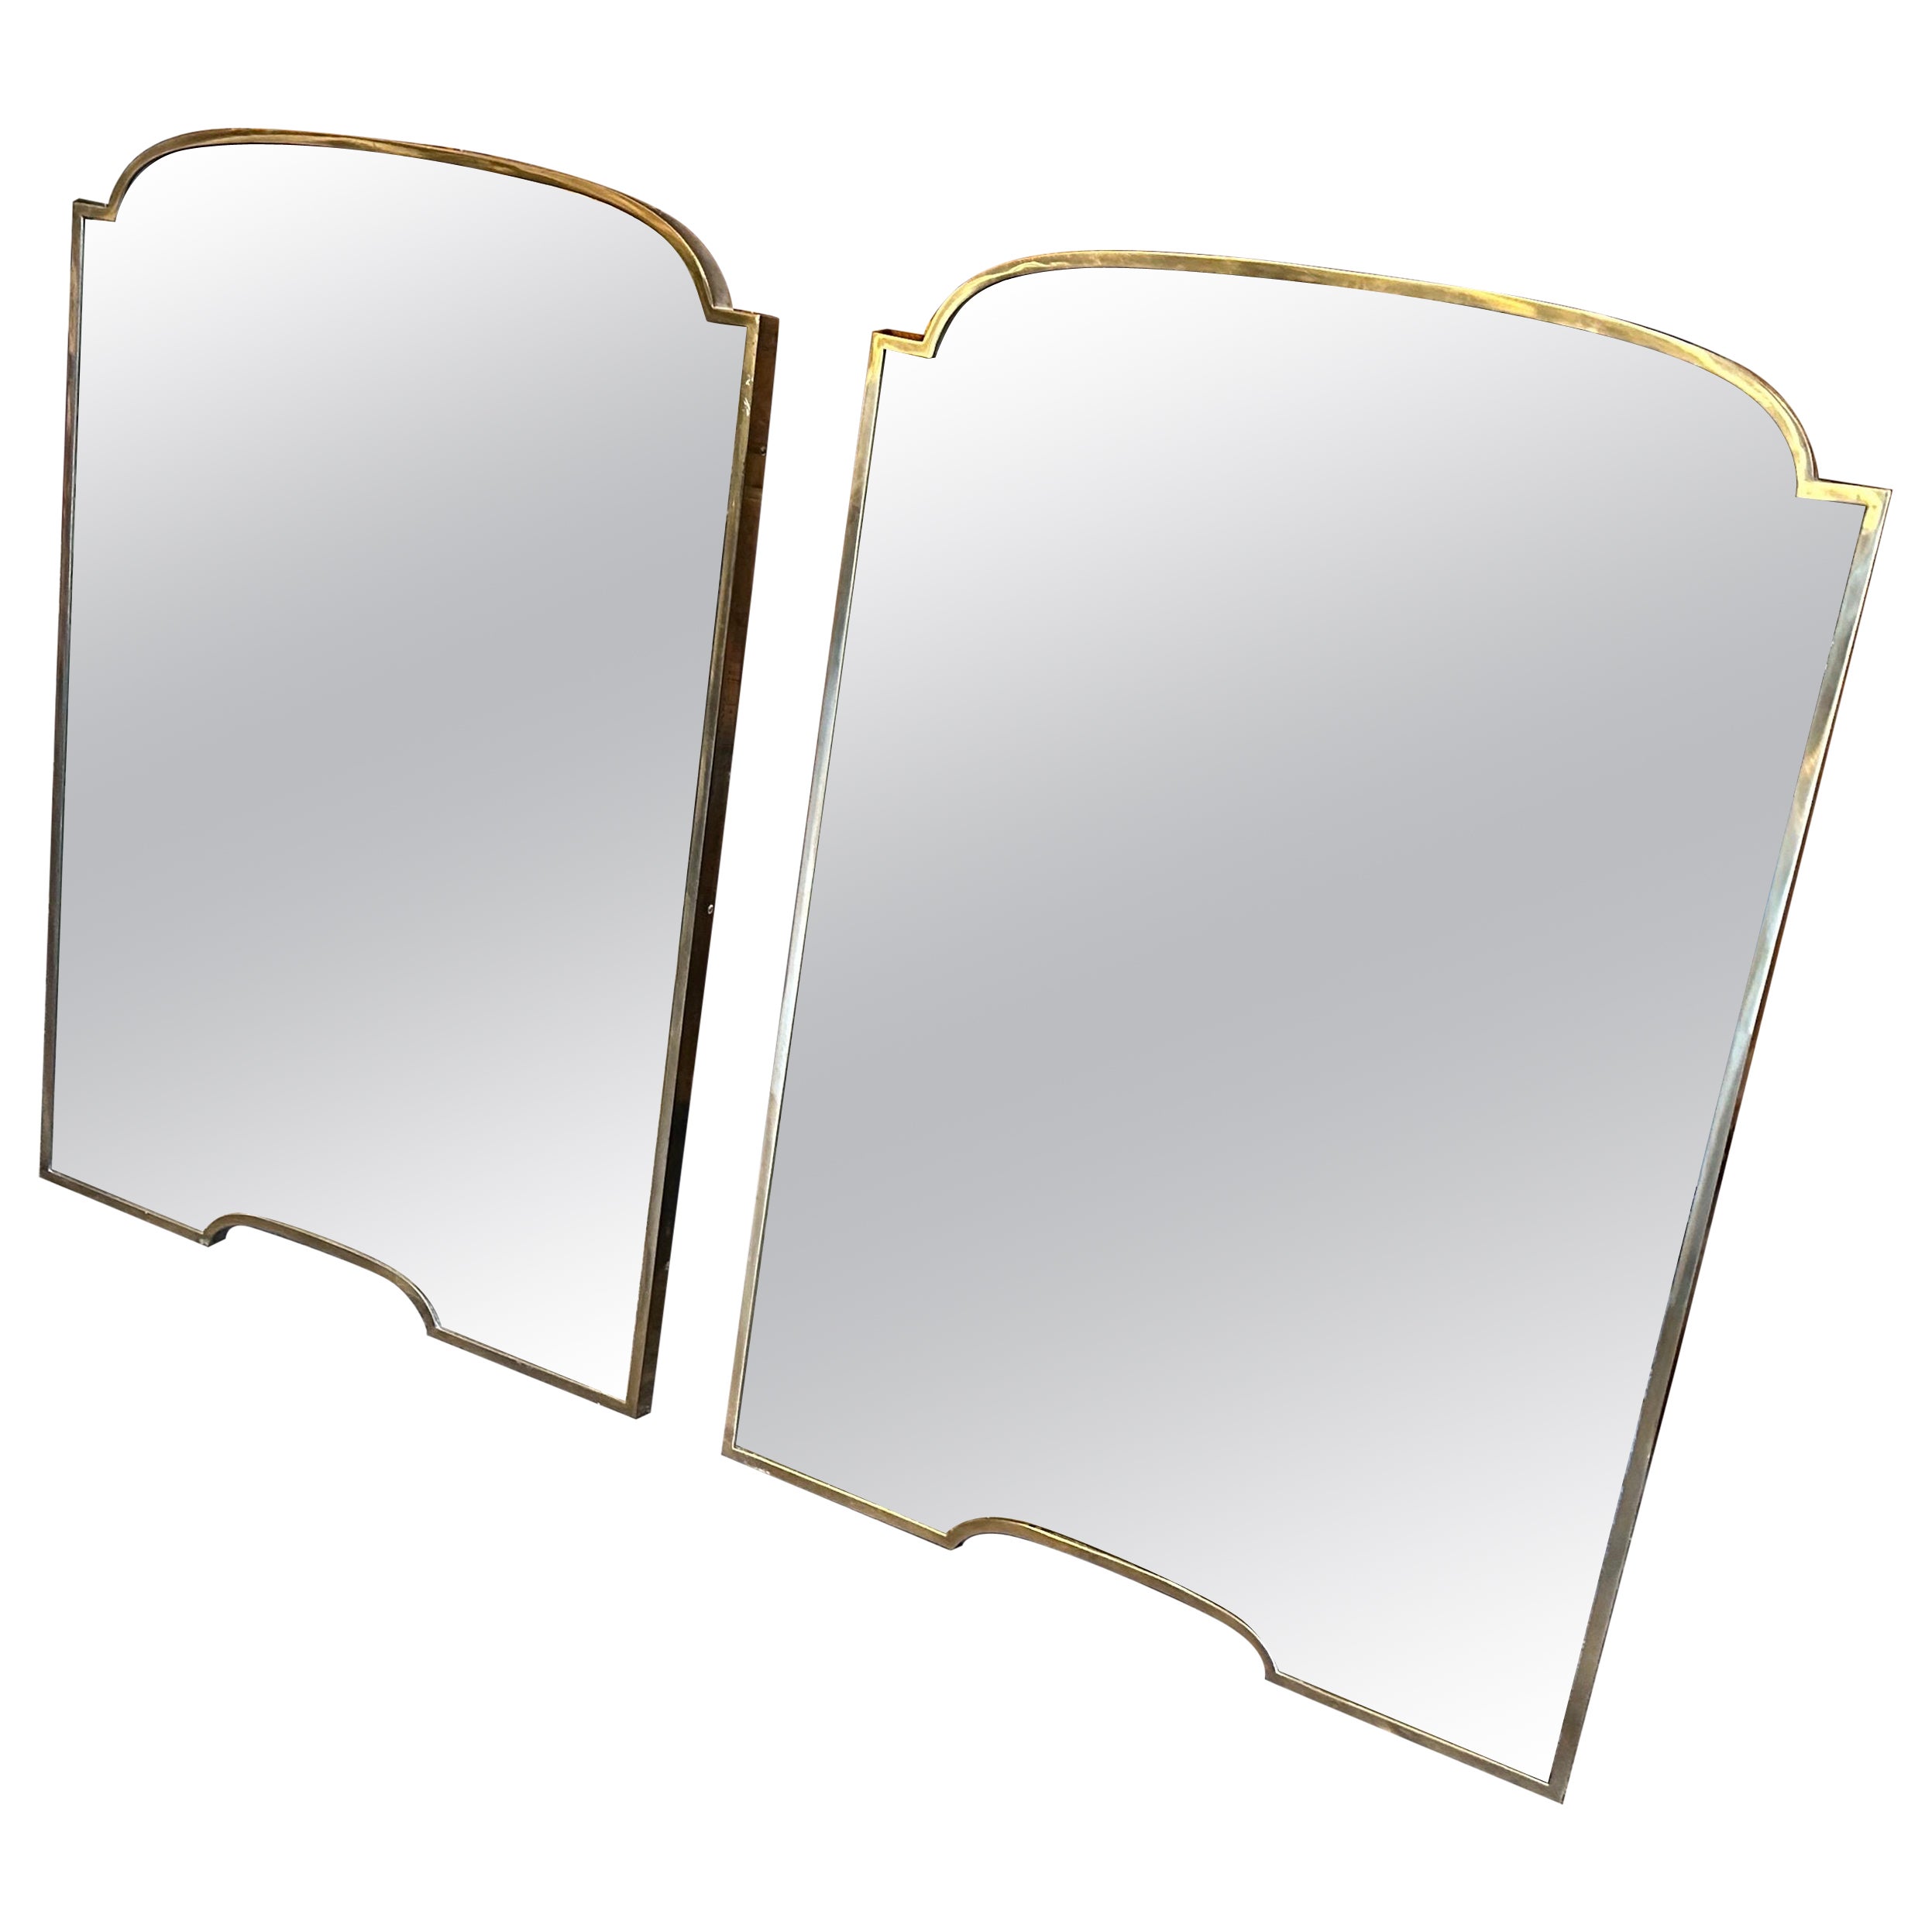 Set of Two 1950s Gio Ponti Style Mid-Century Modern Brass Italian Wall Mirrors For Sale